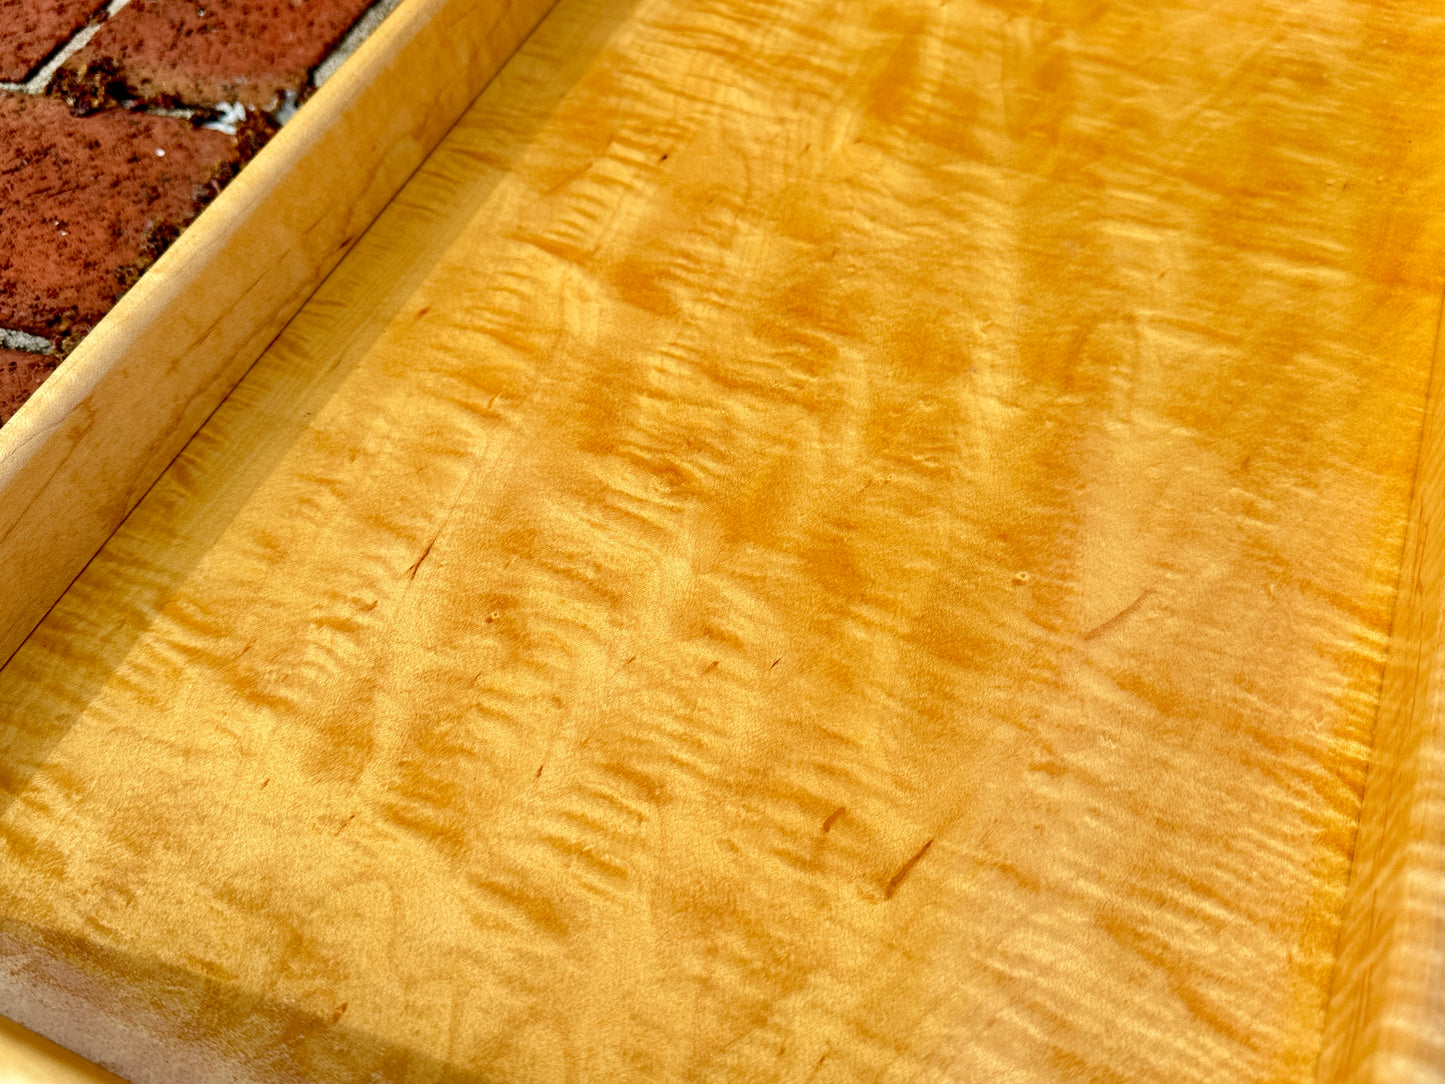 Serving Tray-Curly Maple